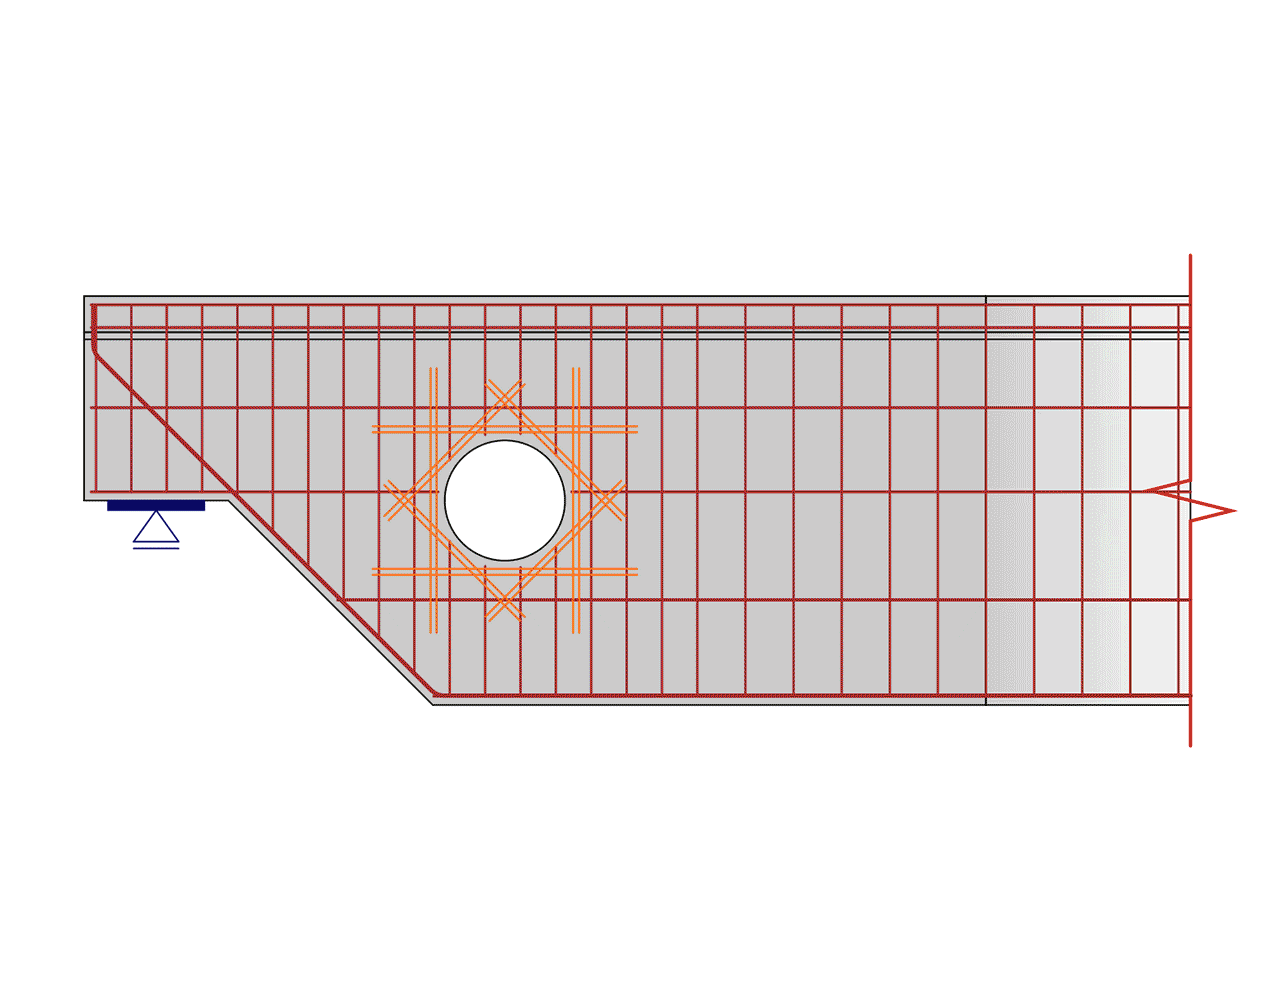 Structural design of a concrete beam with dapped end